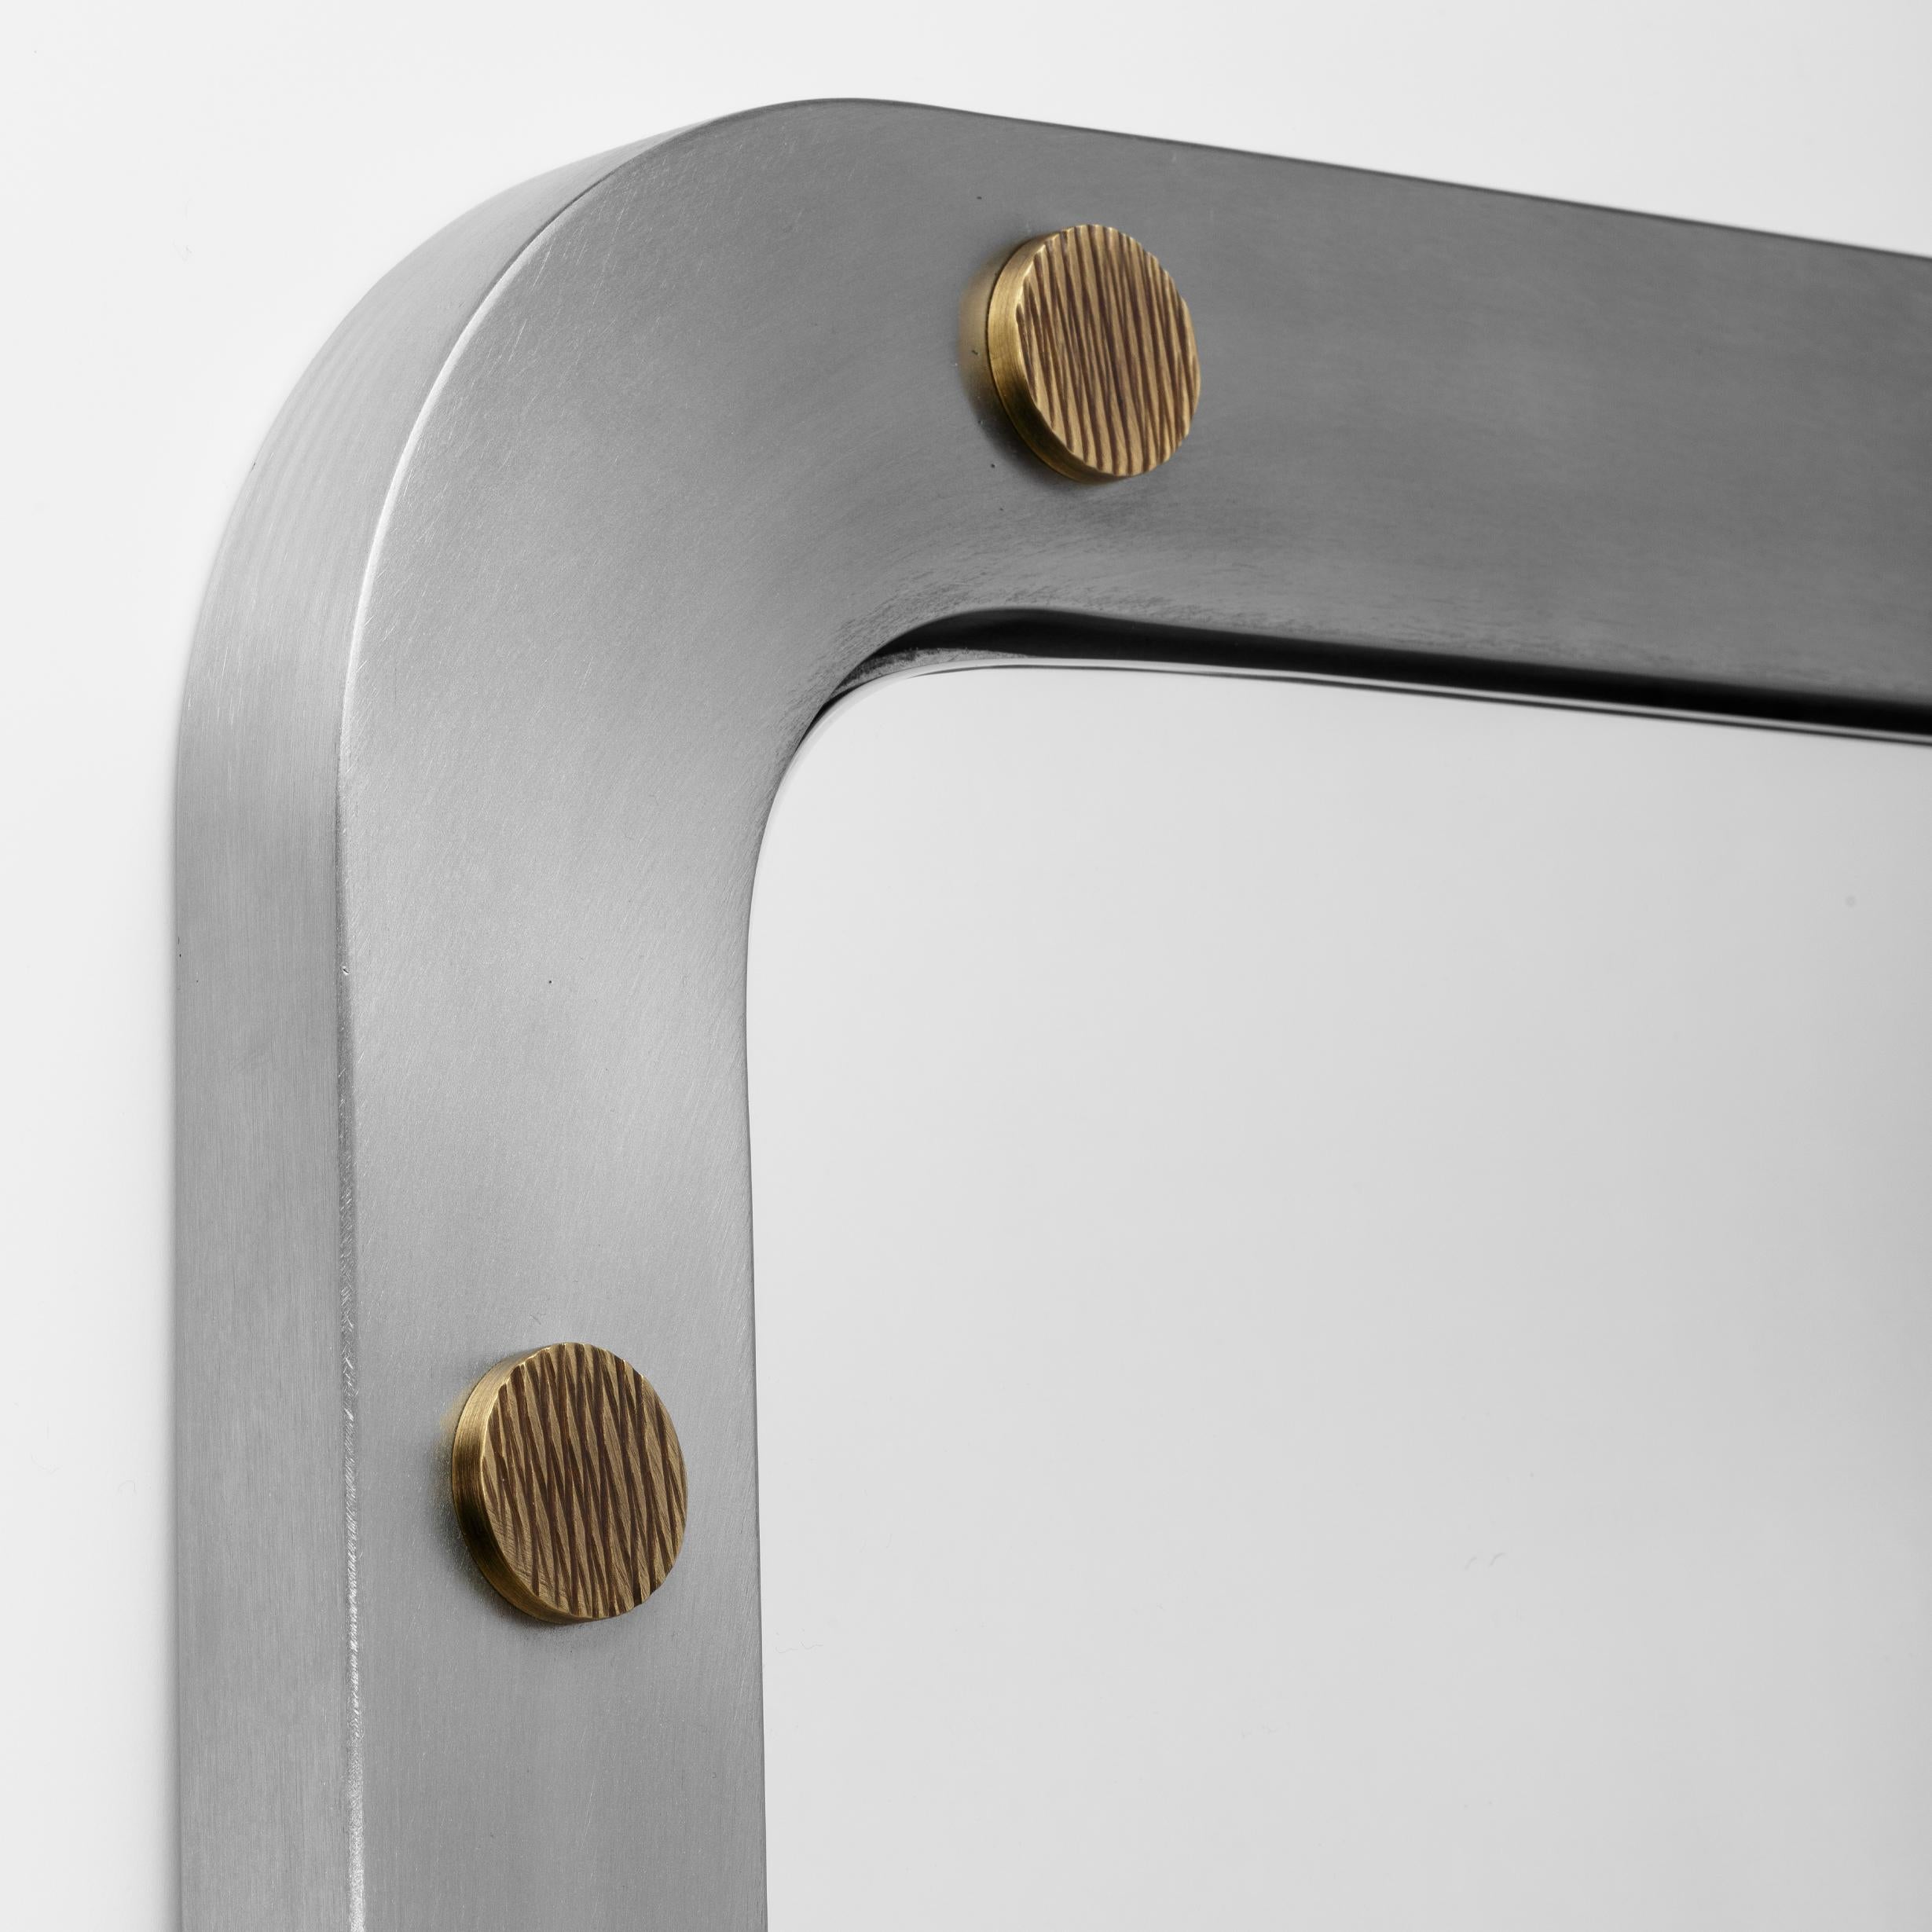 Cluster Mirror, in Brushed Stainless Steel, Handcrafted in Portugal by Duistt

Cluster mirror, crafted with great attention to details, has a brushed stainless steel structure and light bronze details that will standout in any interior.

Shown in